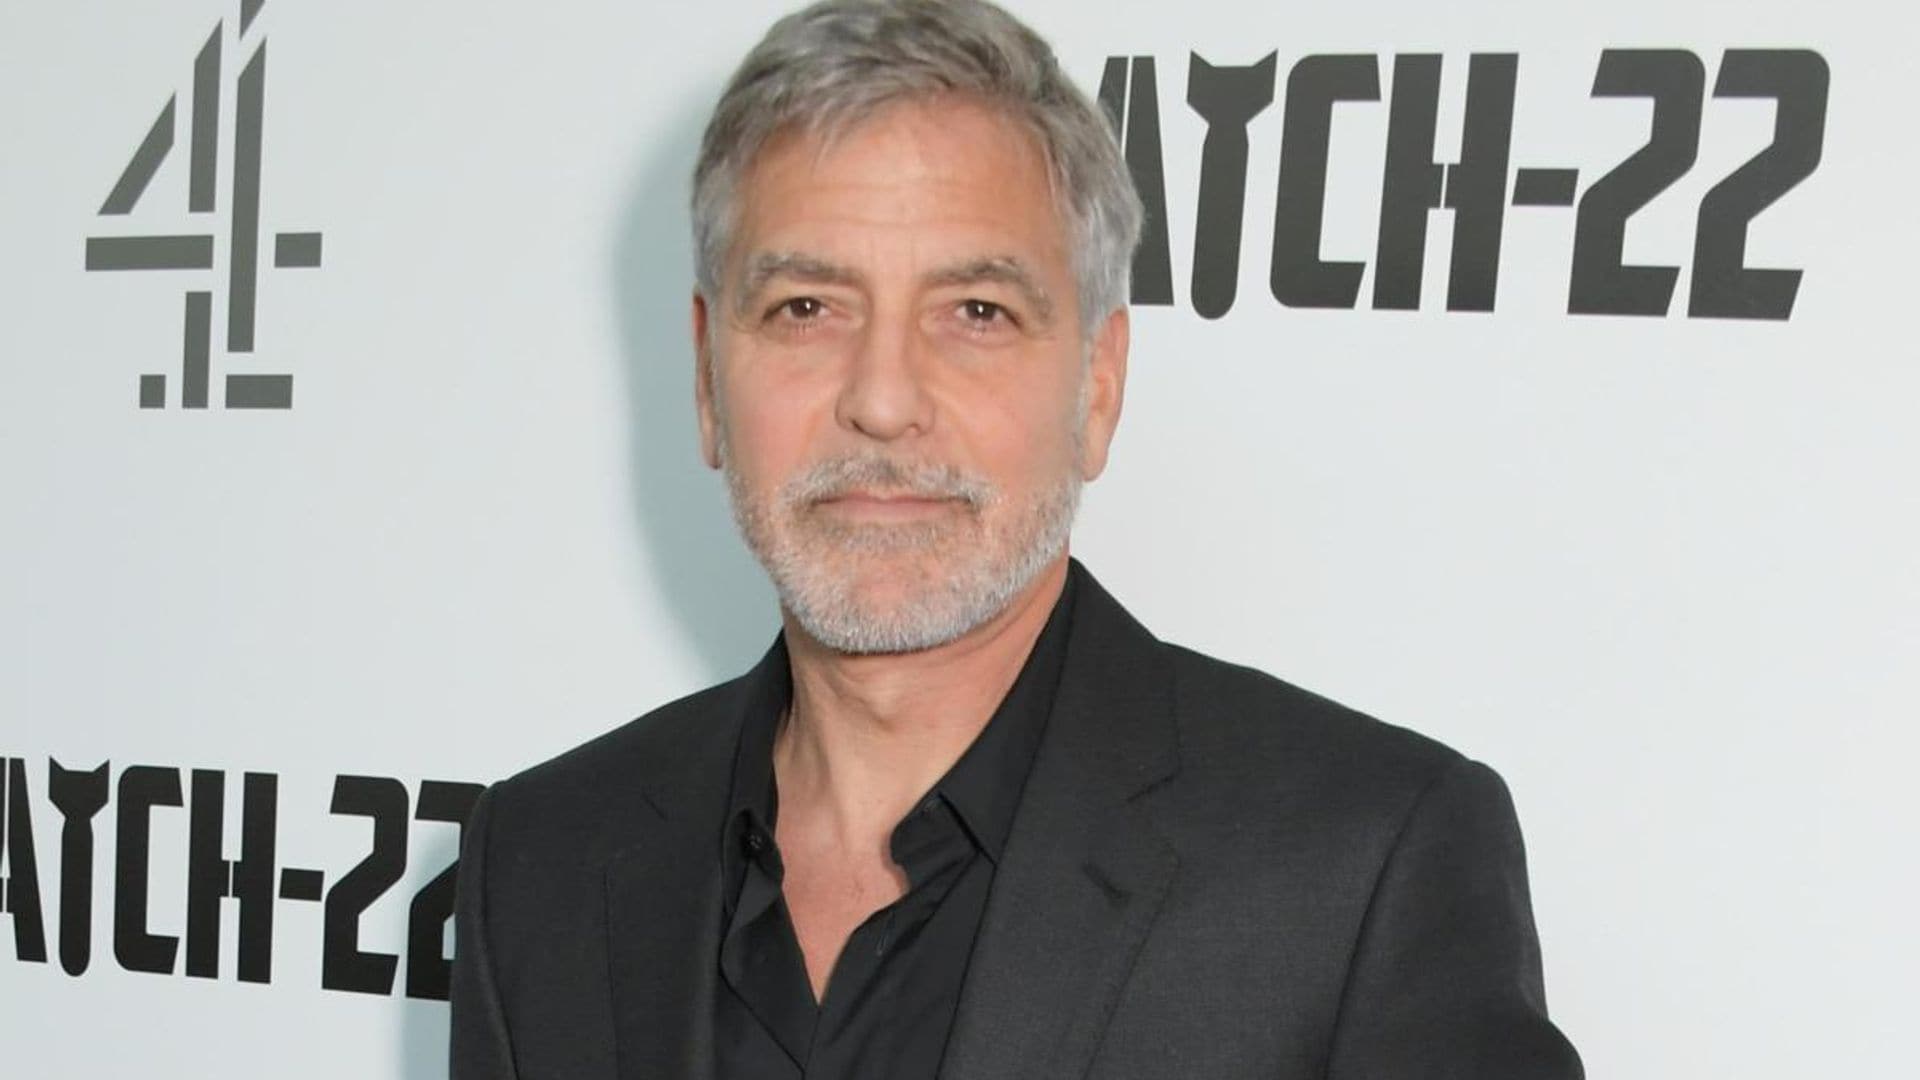 George Clooney reveals how the pandemic changed his film ‘The Midnight Sky’